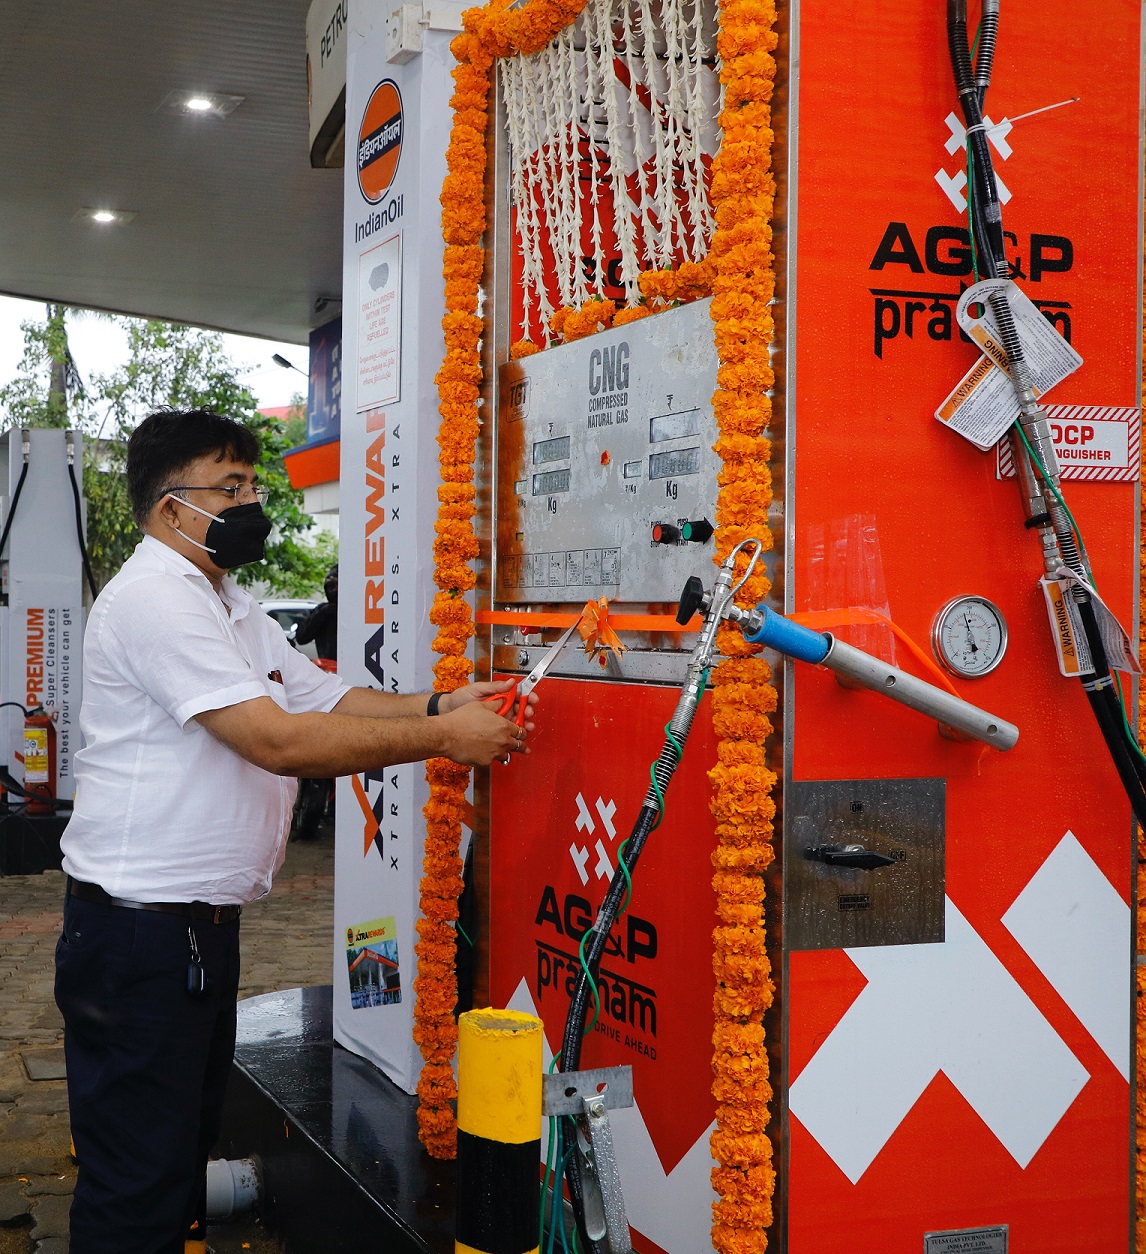 Ag P Pratham Opens The First Two Cng Stations In Ramanathapuram Tamil Nadu Products Suppliers Manufacturing Today India